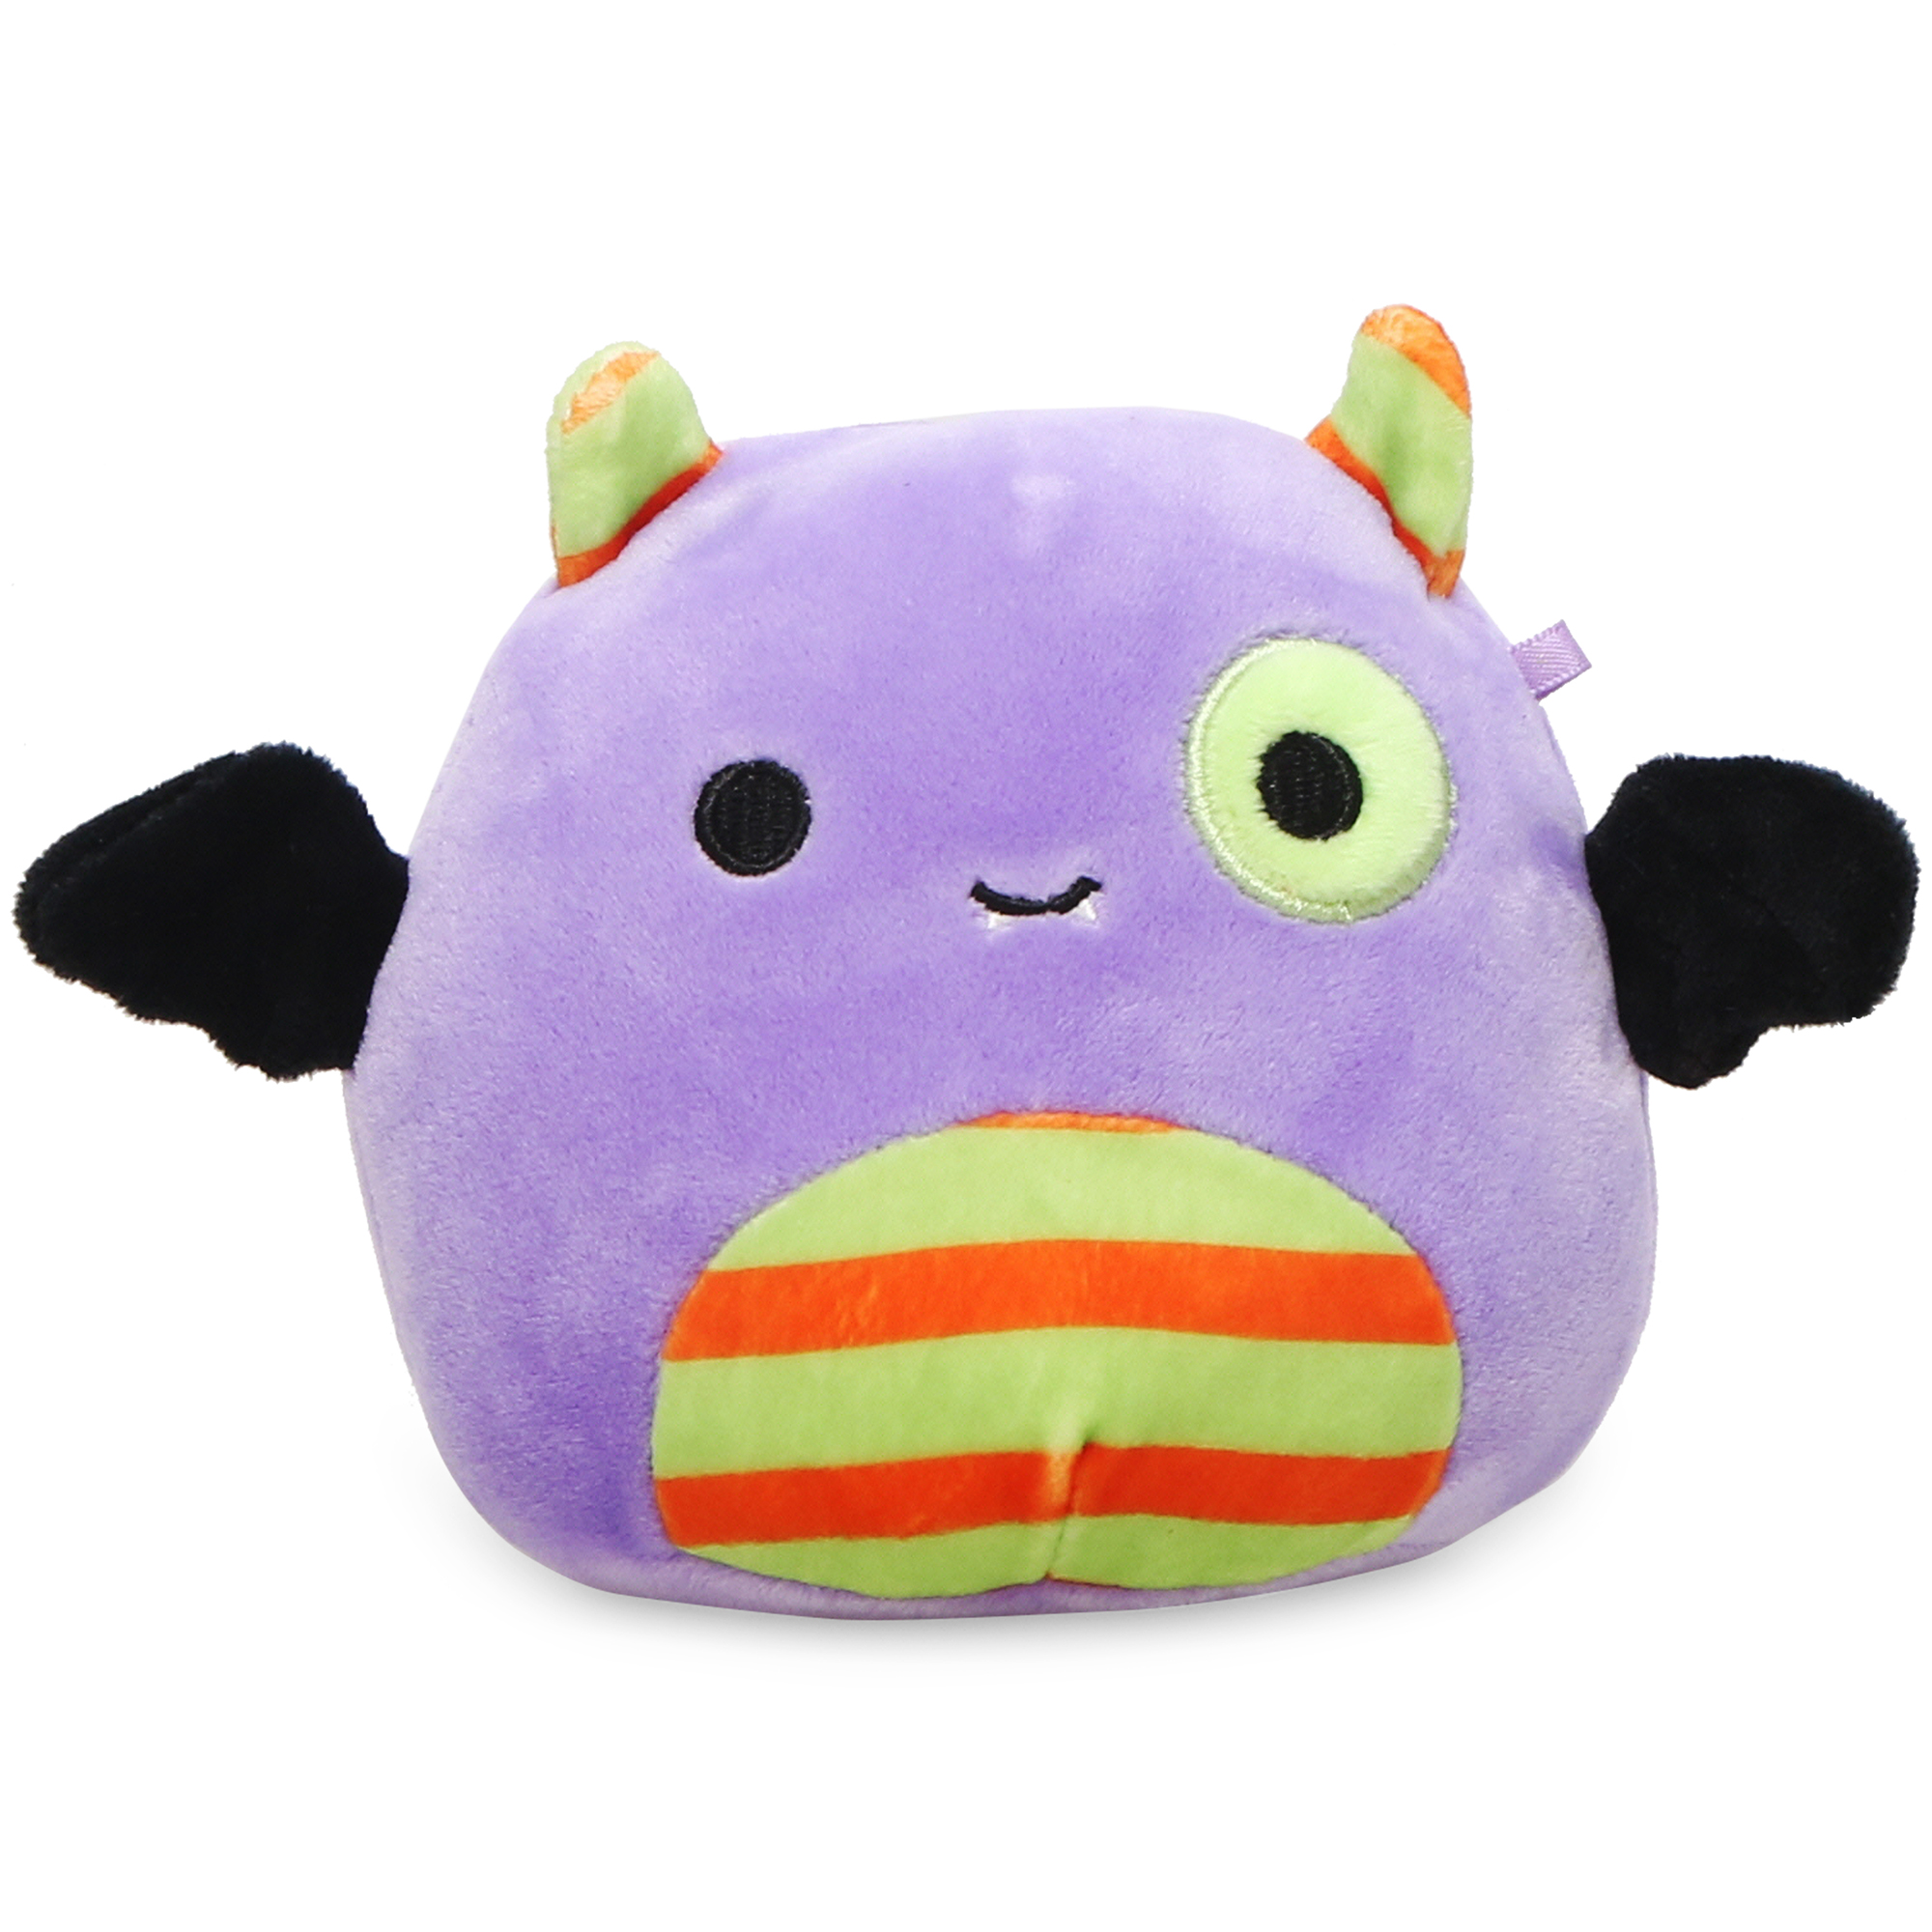 Halloween Tomos The Frog Squishmallow 4.5” NWT  Classy halloween decor,  Outside halloween decorations, Purple stuffed animals